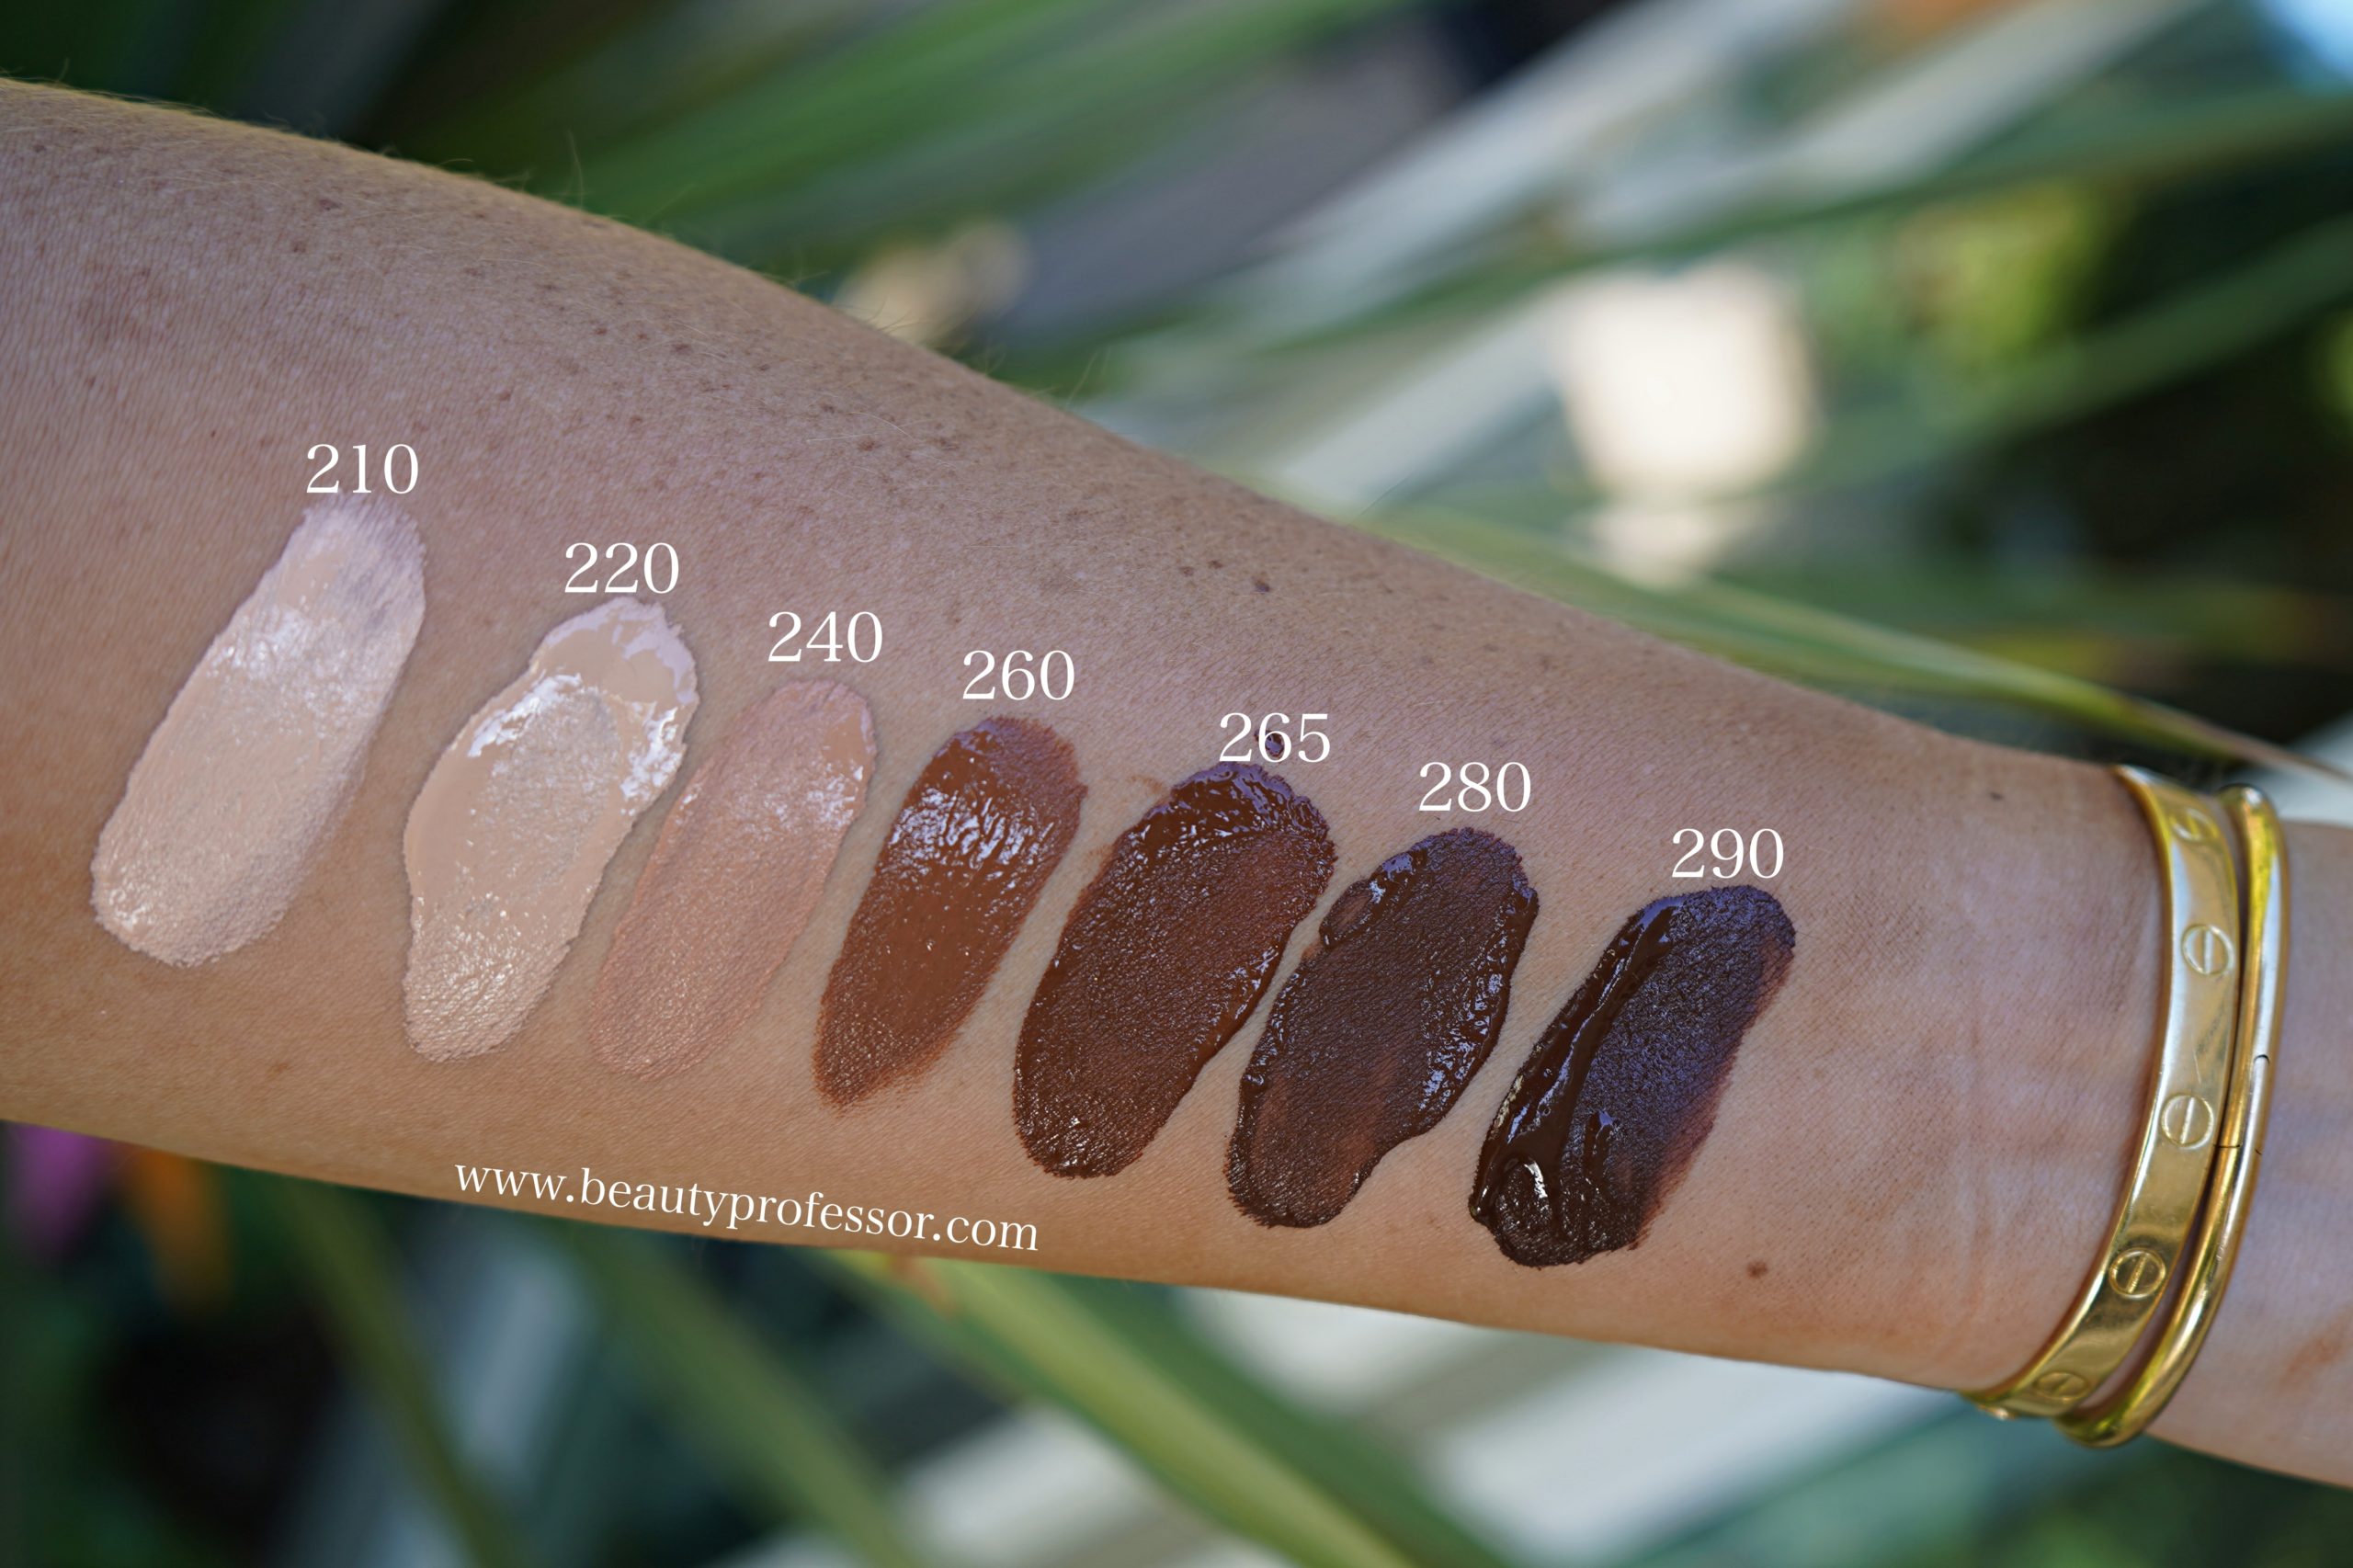 SUQQU The Liquid Foundation shades for skin with rosy/pink undertones in outdoor shade